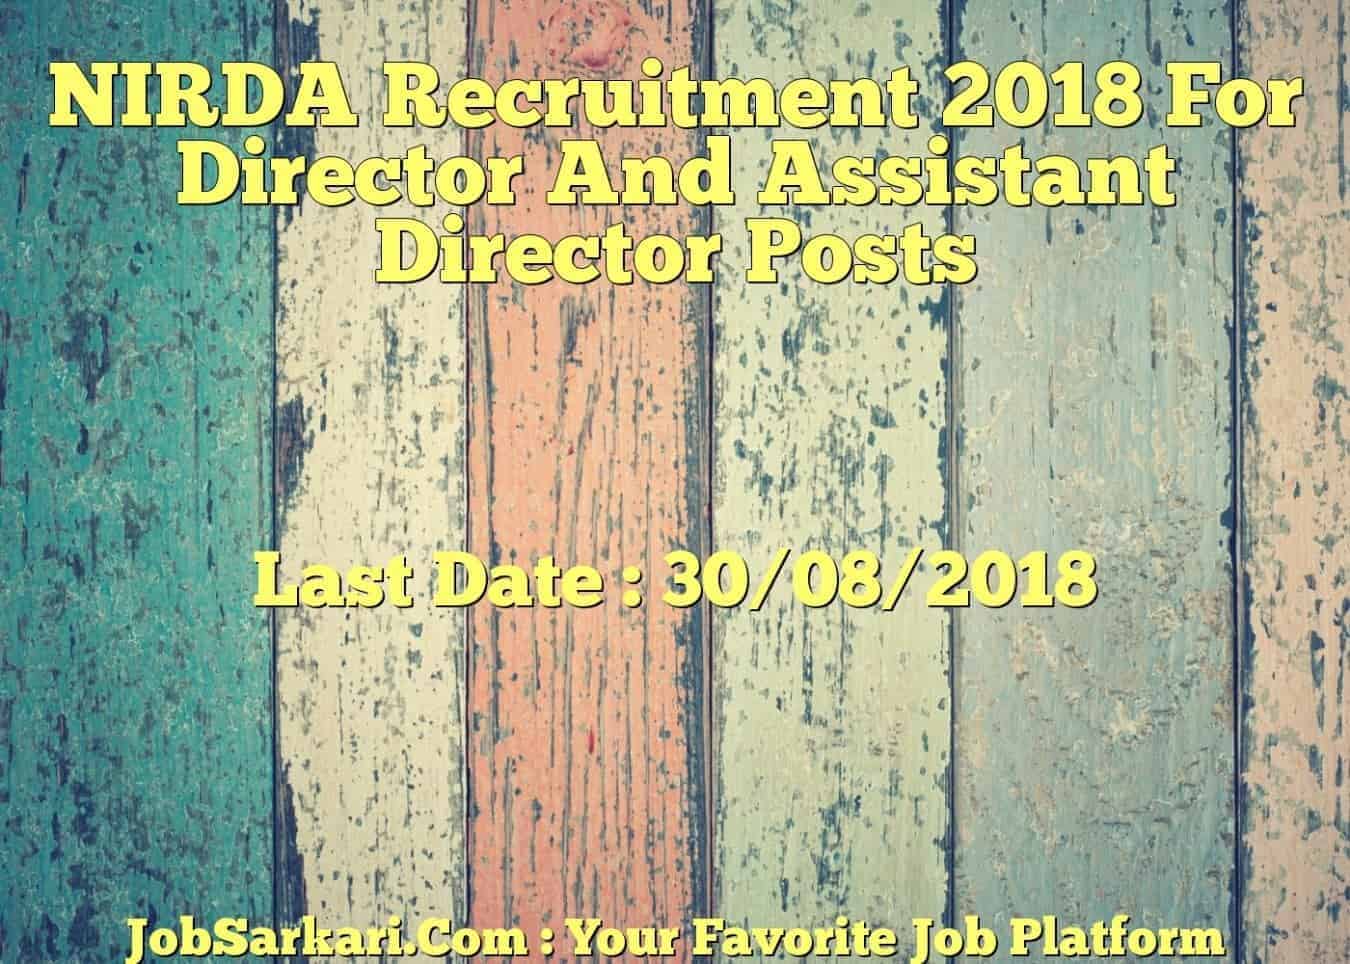 NIRDA Recruitment 2018 For Director And Assistant Director Posts